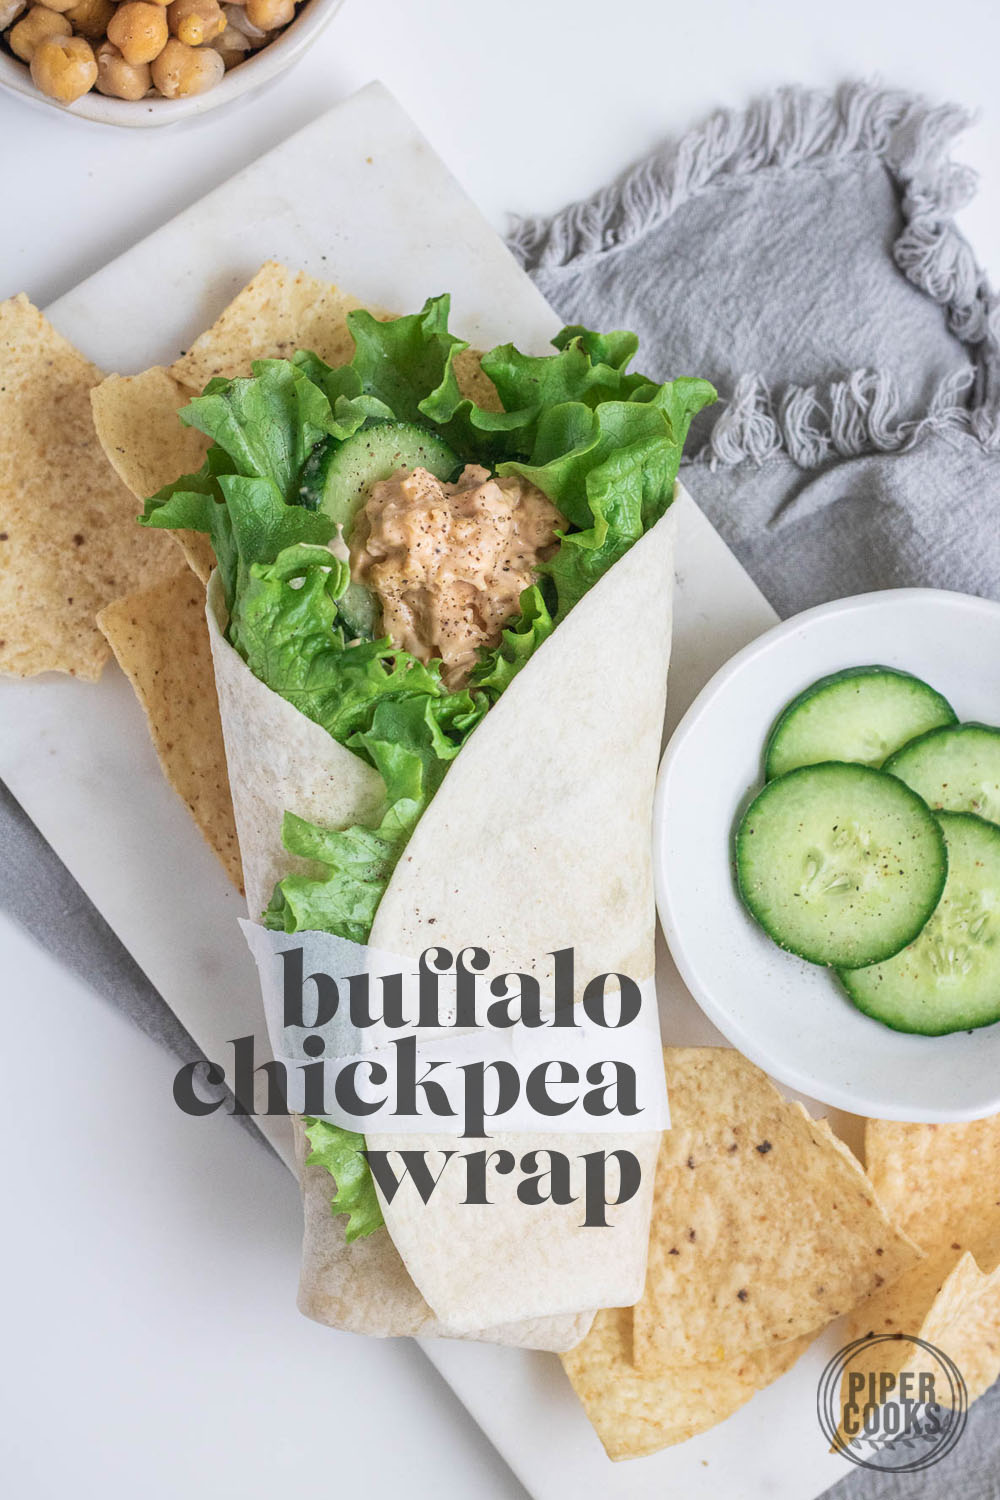 chickpea sandwich spread and lettuce in a wrap.